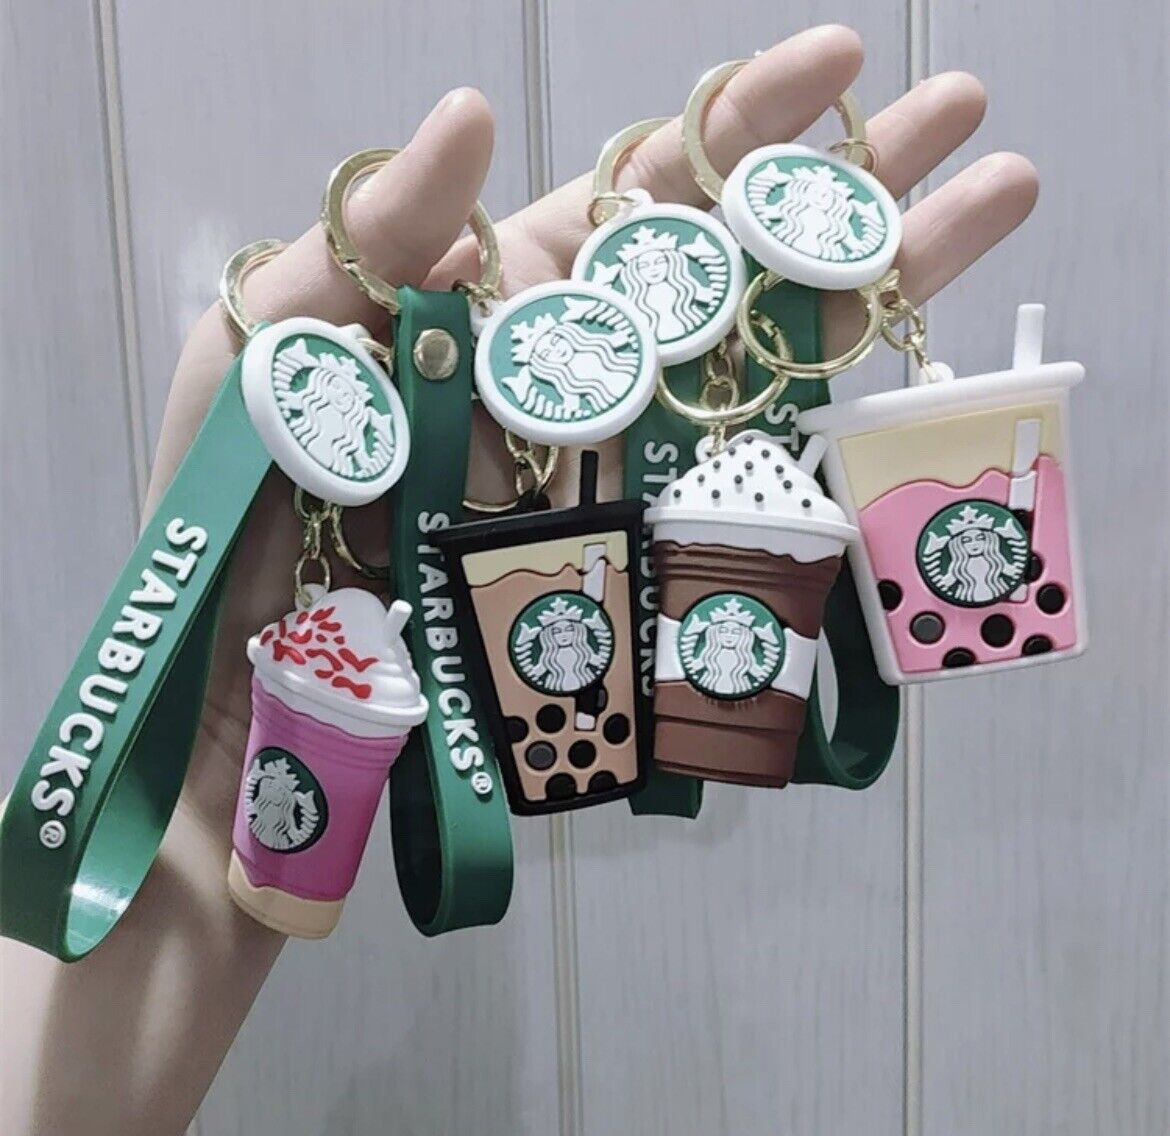 New❗️STARBUCKS Inspired Keychains-4 Adorable Designs To Choose From-FREE SHIP